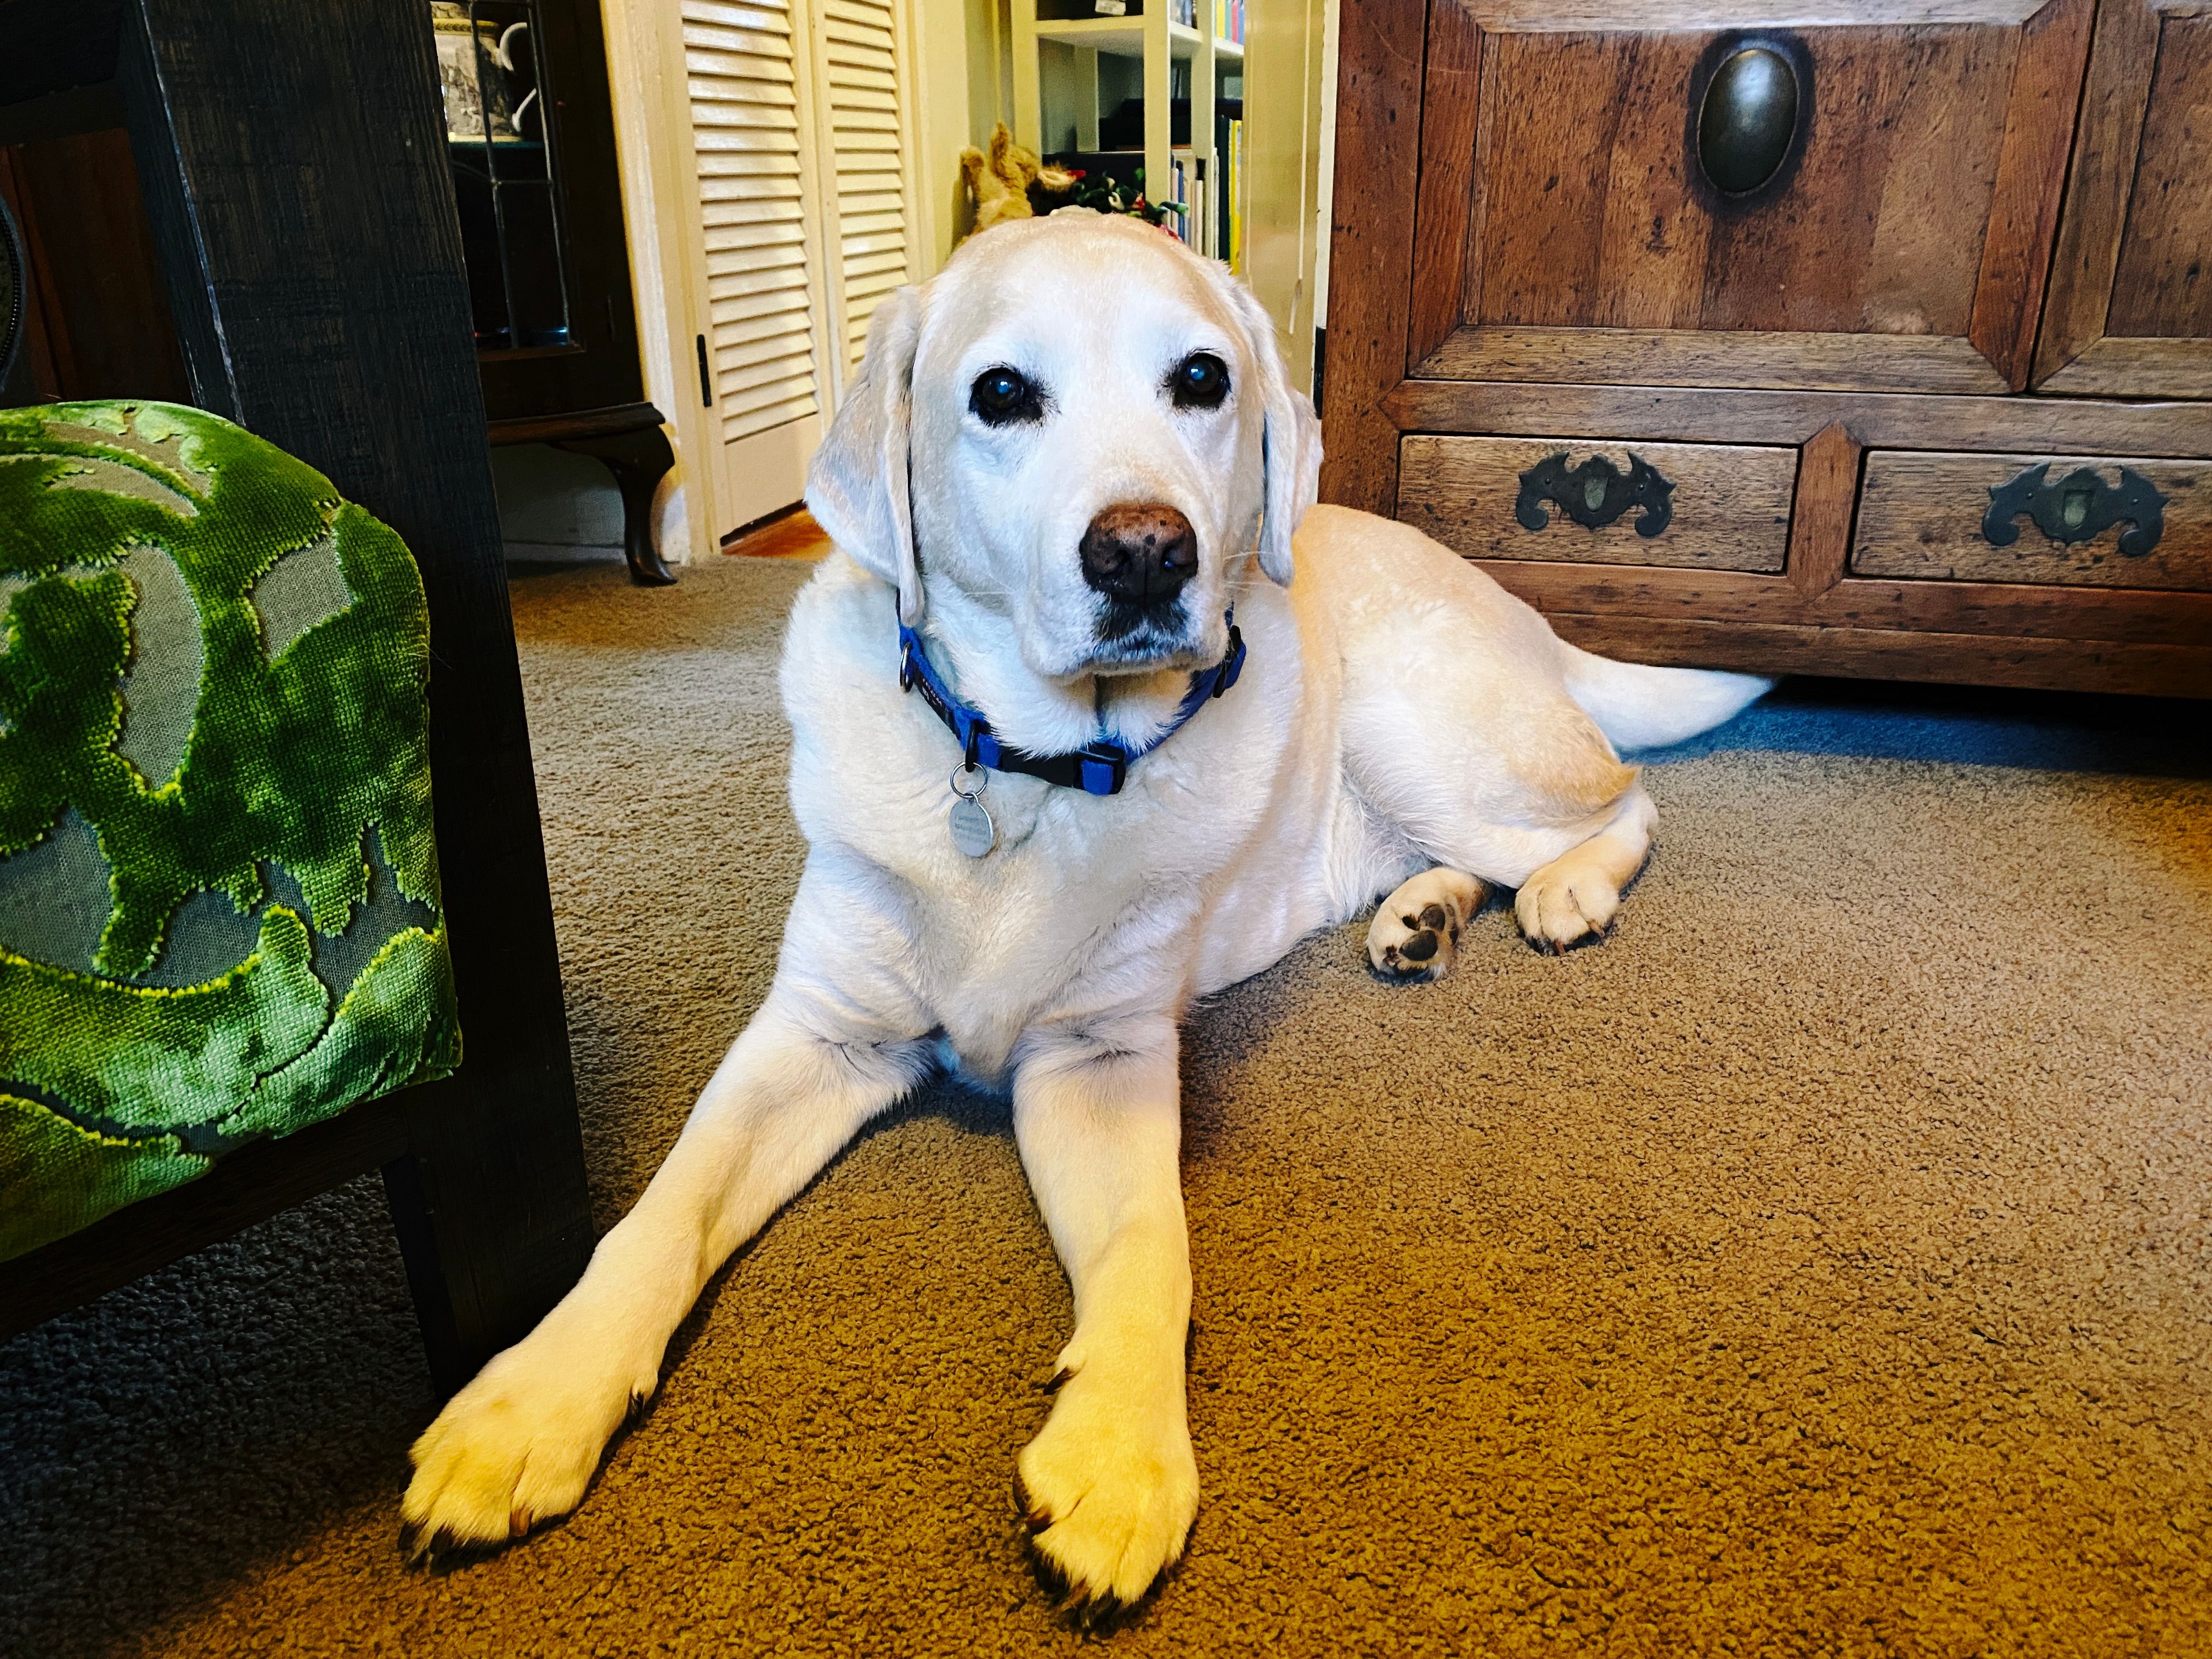 A photo an old golden labrador lying on the carpet looking at the camera.